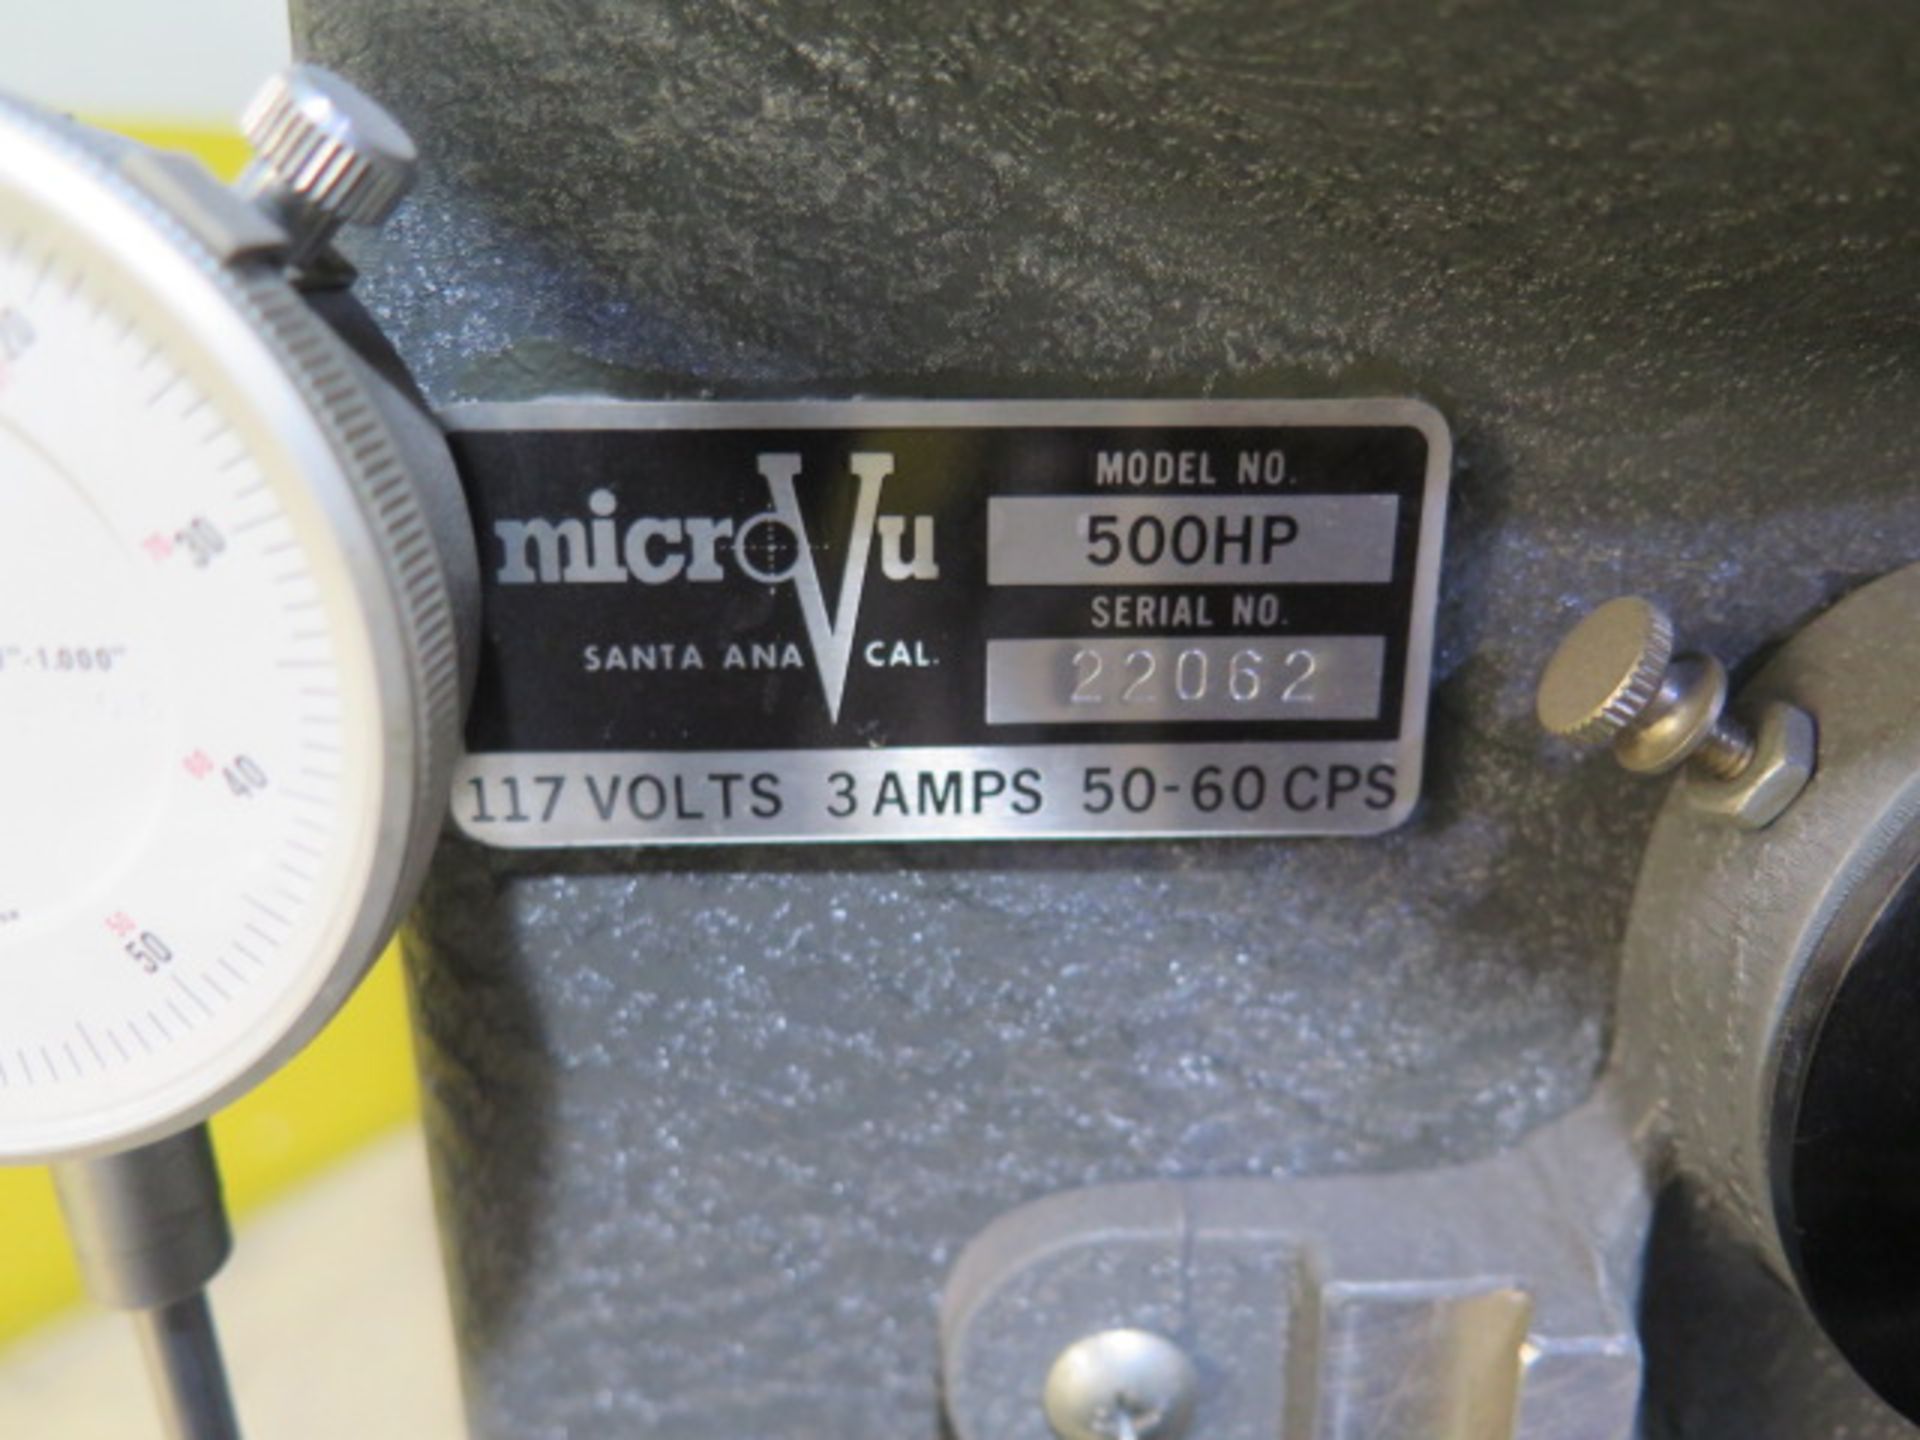 MicroVu 500HP 12” Optical Comparator (SOLD AS-IS - NO WARRANTY) - Image 8 of 8